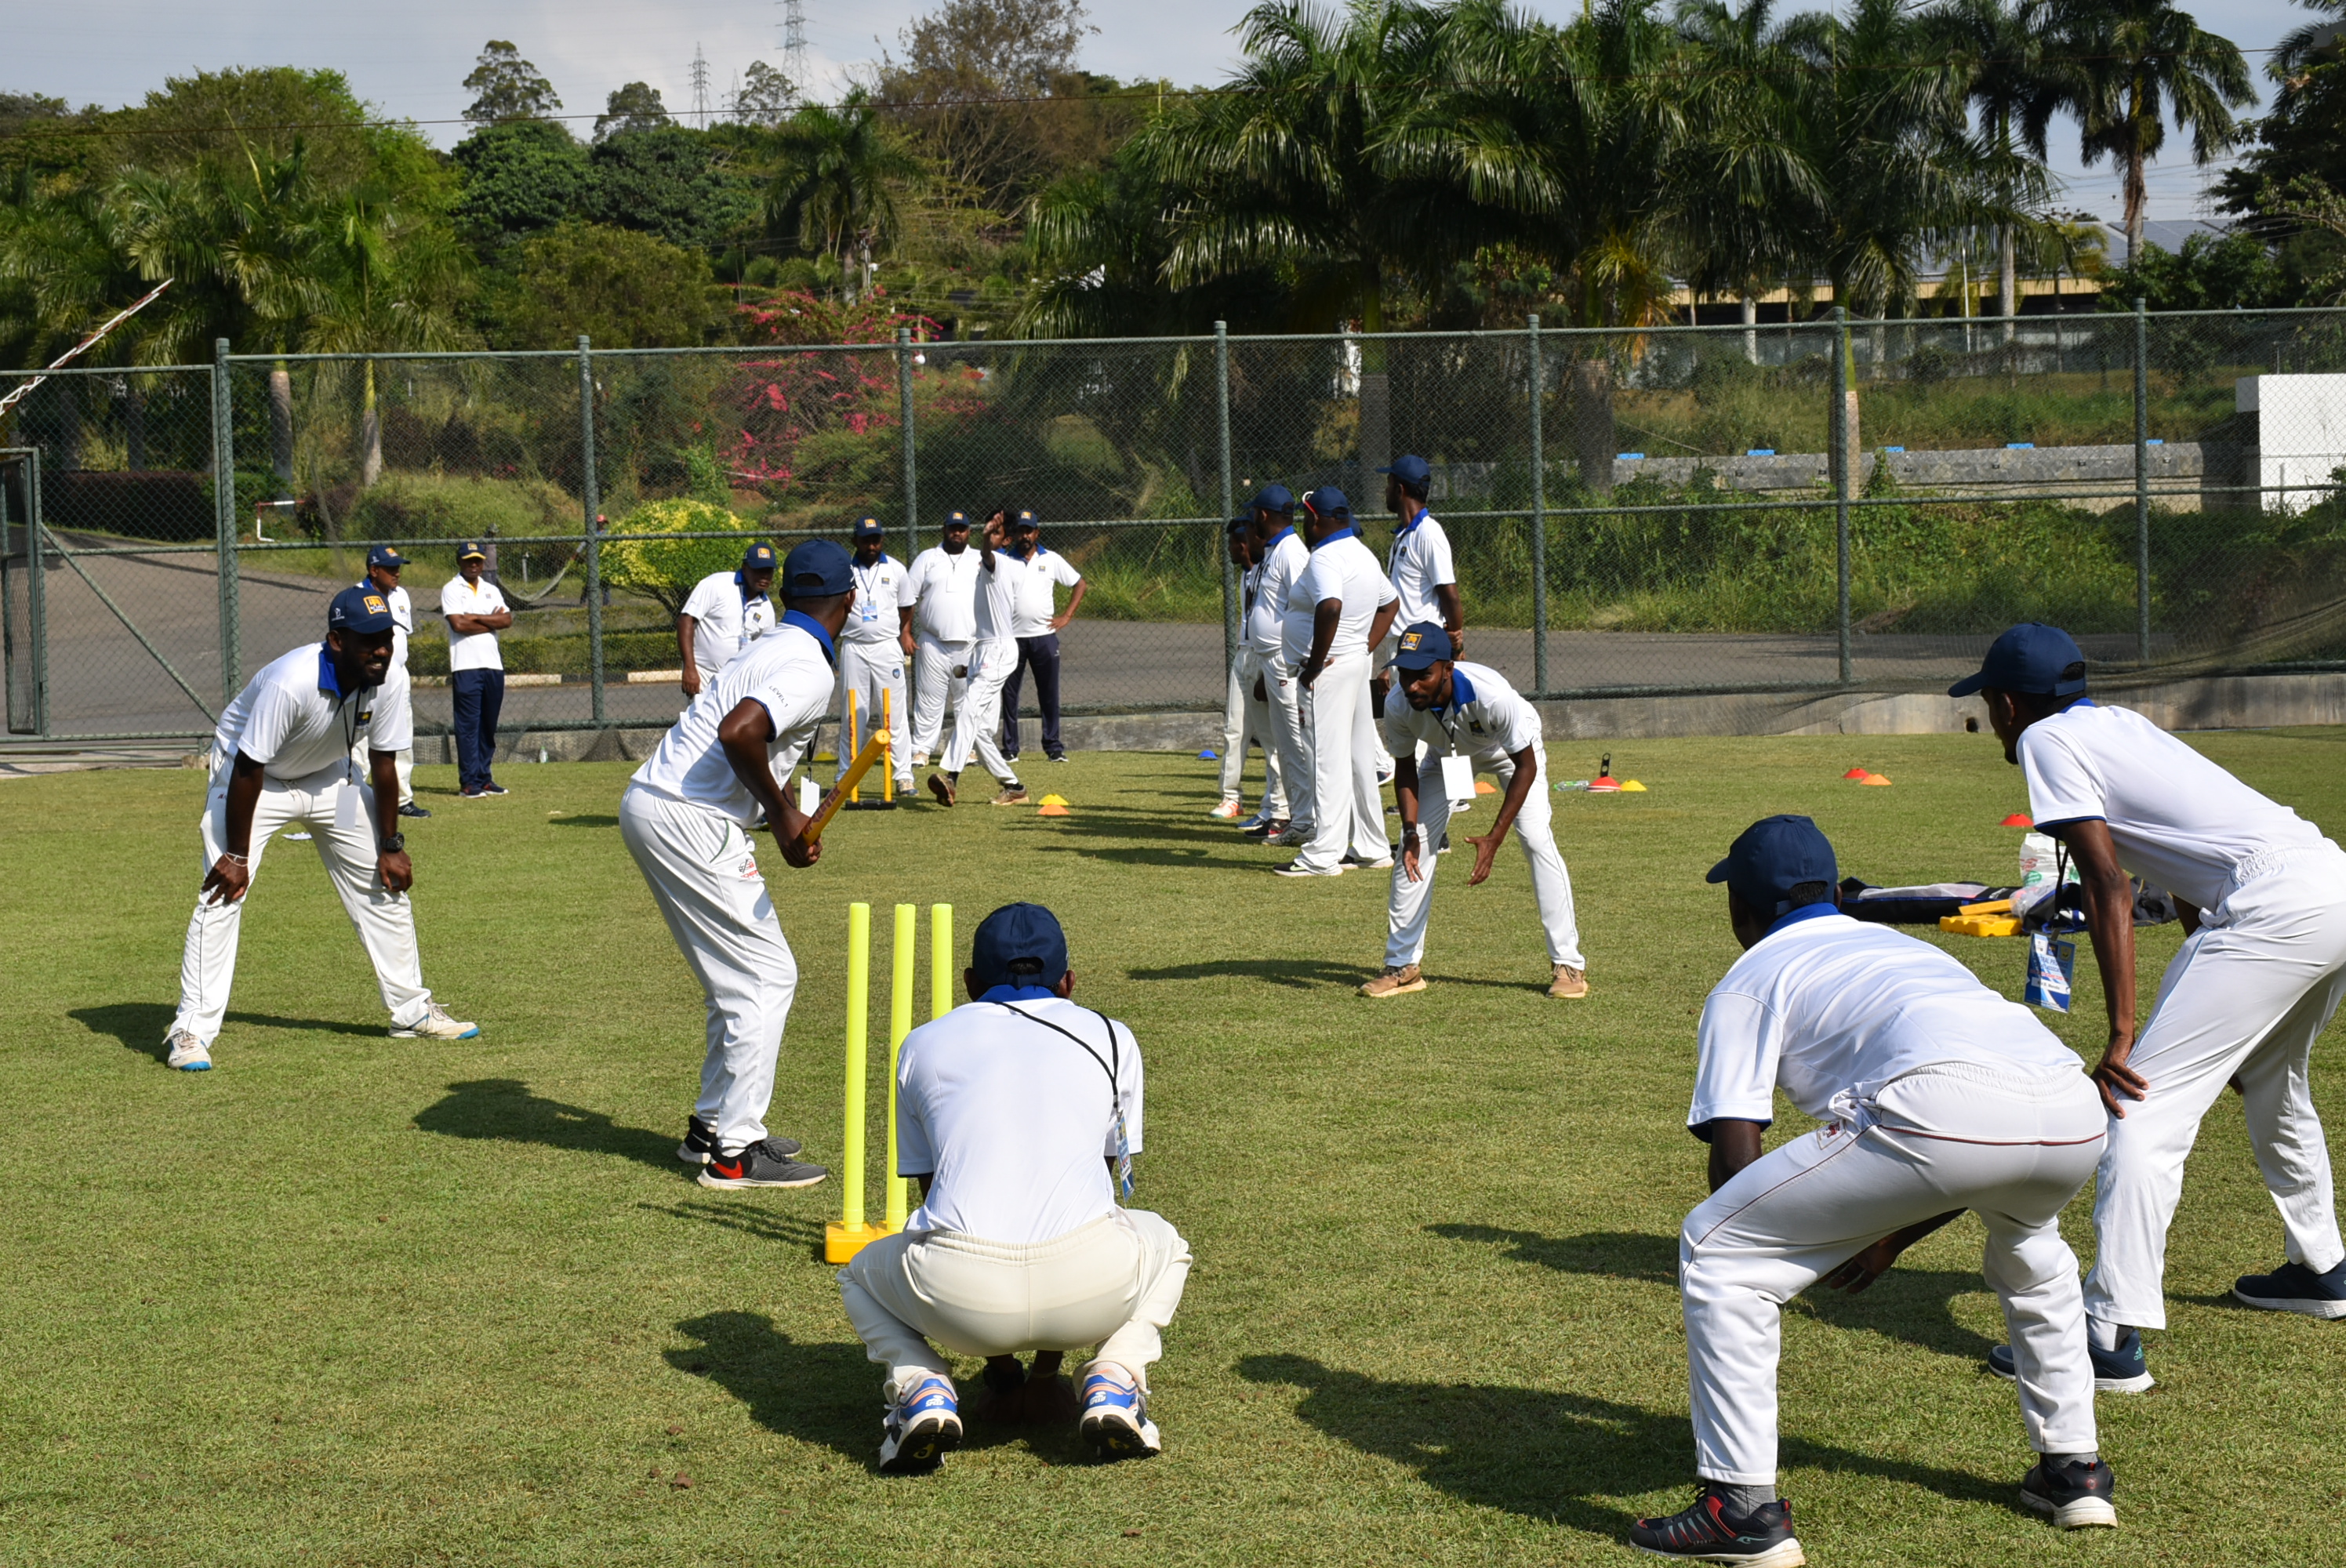 Day 2 of Central Province Level 1 Coaching Course Commenced at Pallekale International Cricket Stadium